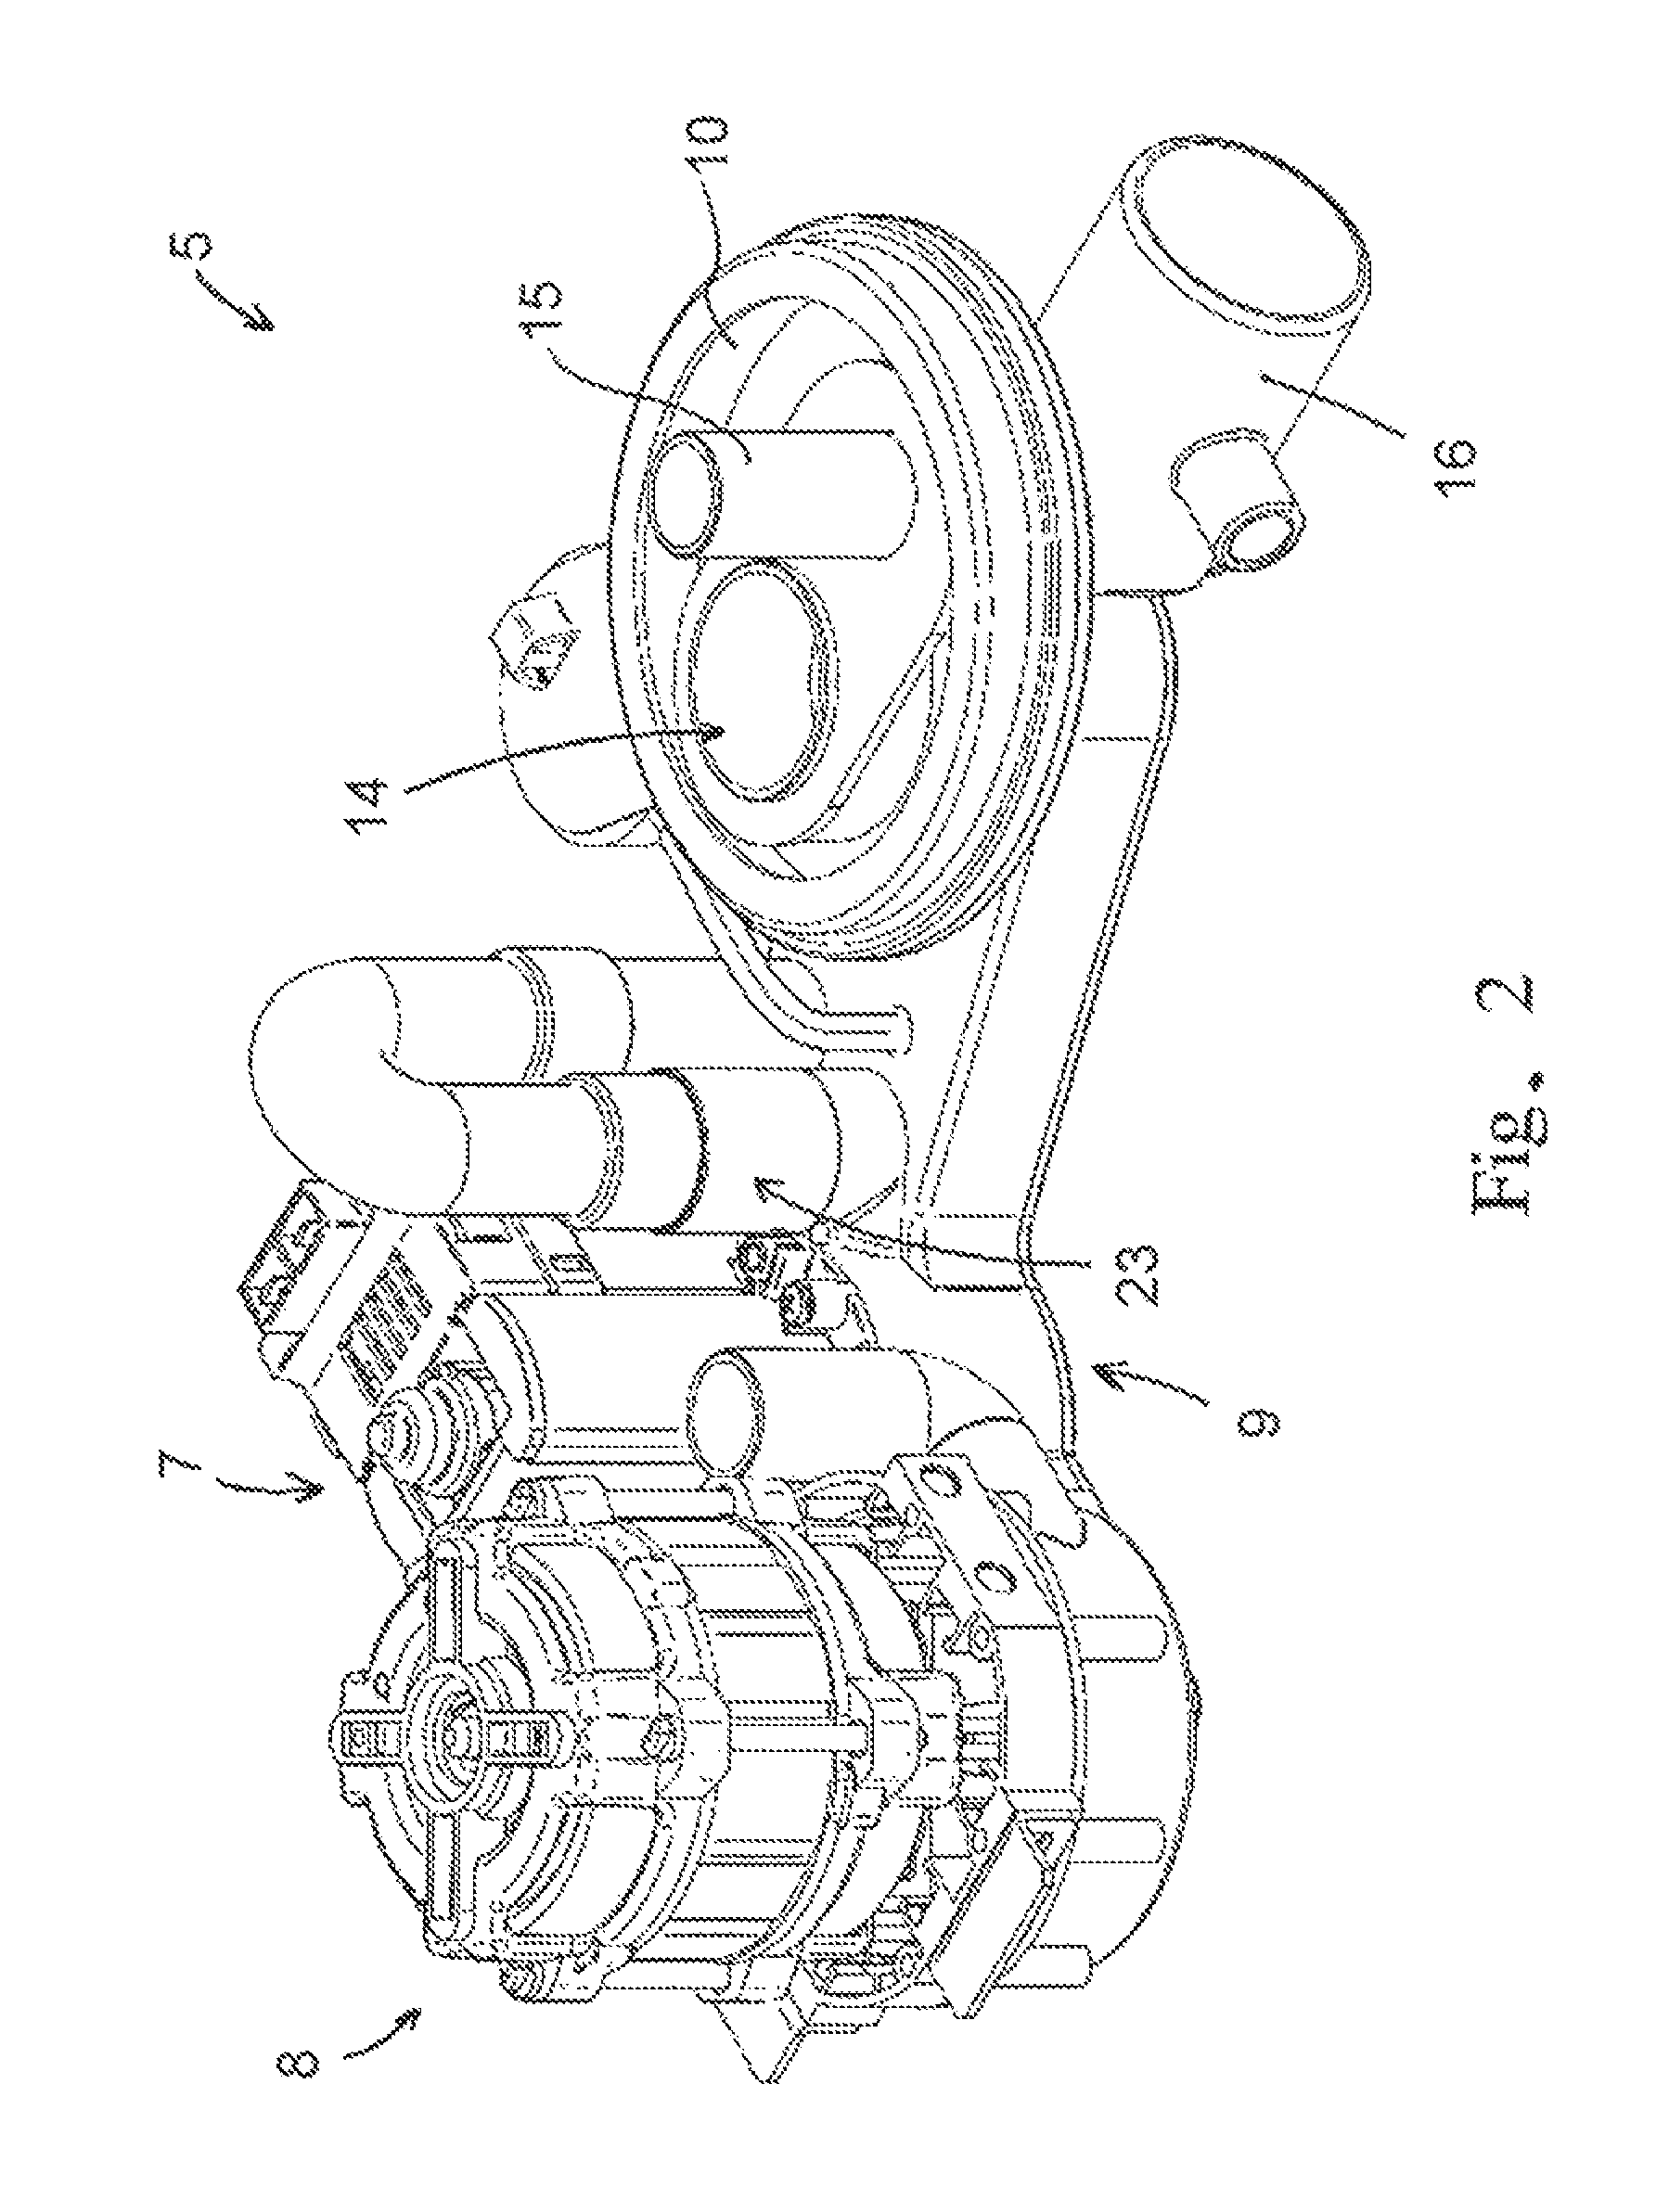 Cleaning device for kitchen appliances and pump systems